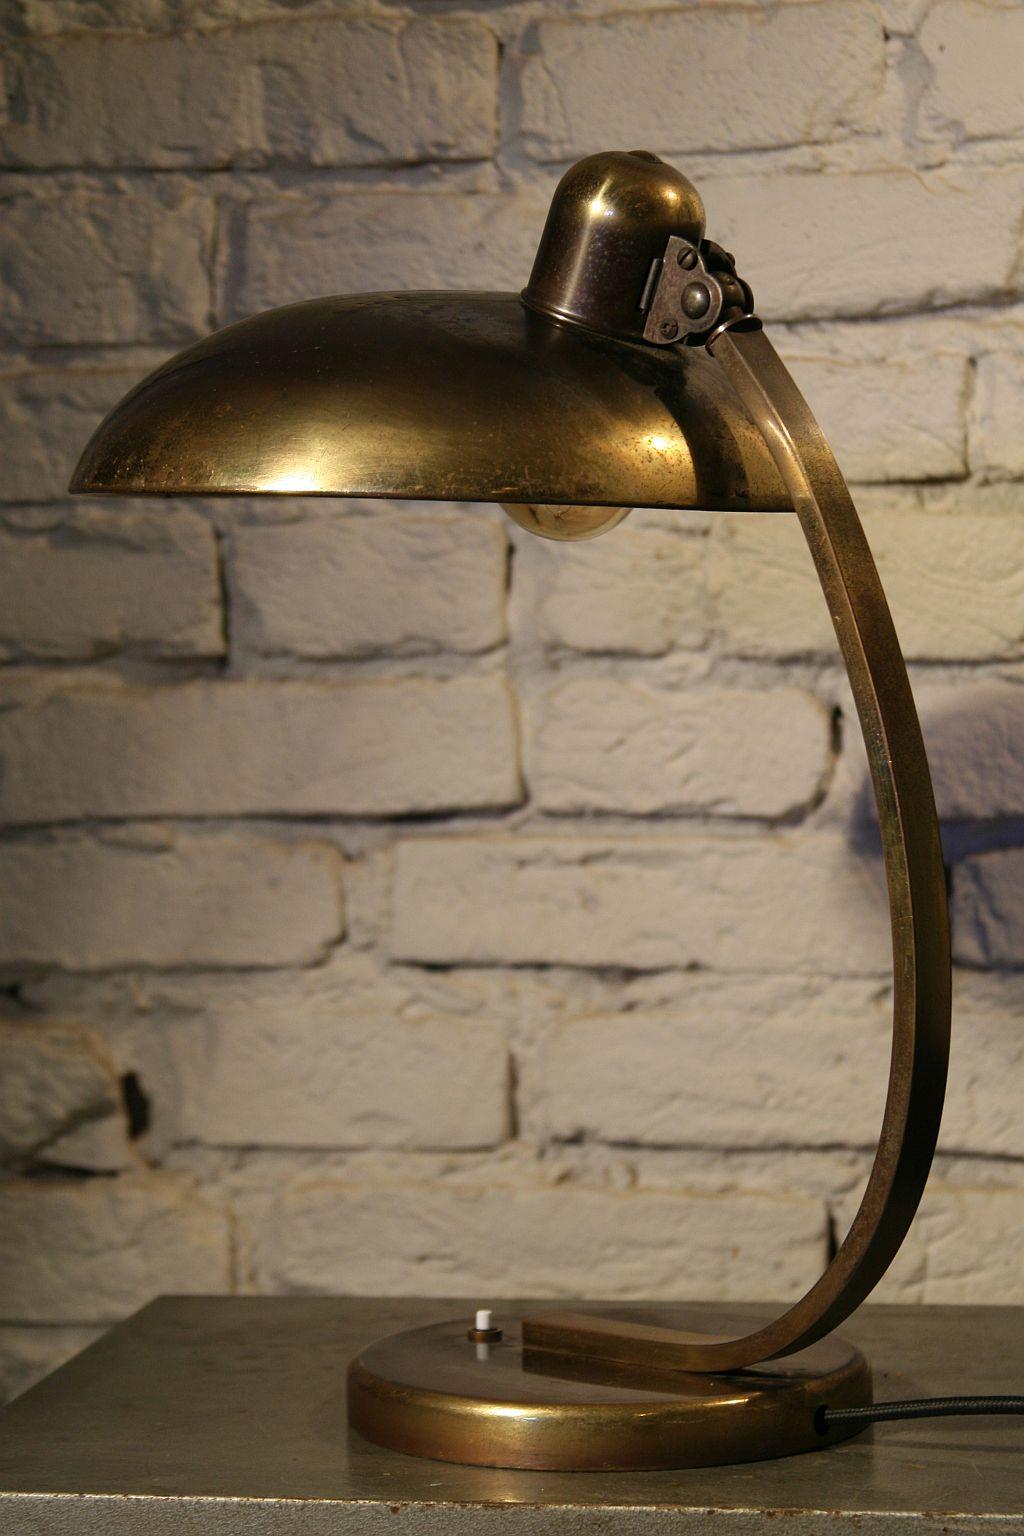 The original desk lamp produced in the 1930s by the German company Kaiser Idell.
Design: Christian Dell.
Construction:
The base, arm and lampshade made of brass, inside the base there is a massive cast iron lamp stabilizing element. In the upper